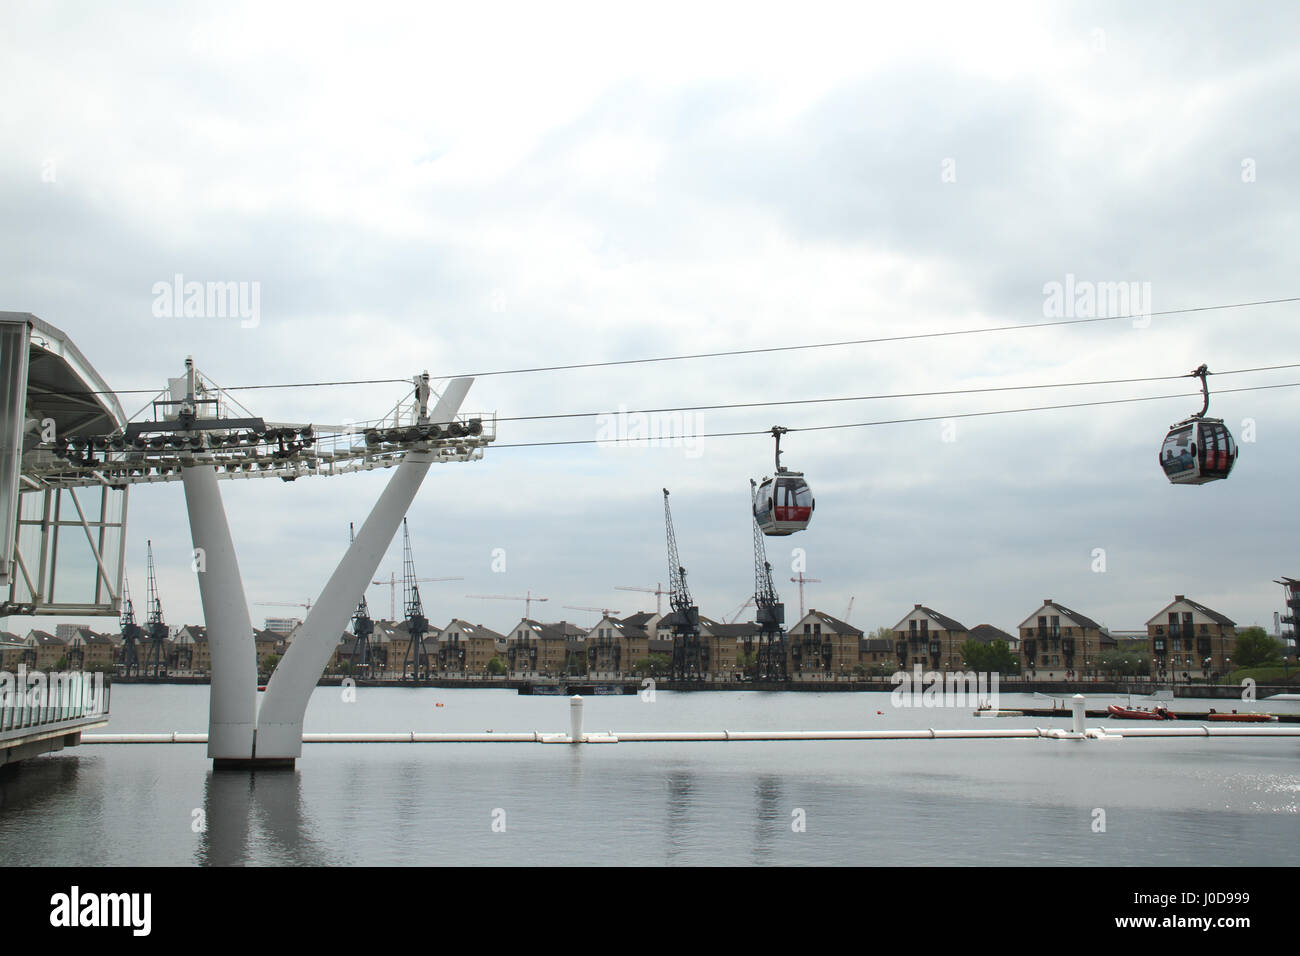 London, UK. 12th Apr, 2017. London, United Kingdom - April 12: Emirates Air Line (Cable car) at the Royal Docks Terminal. The pods crosses the River Thames between Greenwich Peninsula and the Royal Docks in approximately 10 minutes each way. Credit: David Mbiyu/Alamy Live News Stock Photo